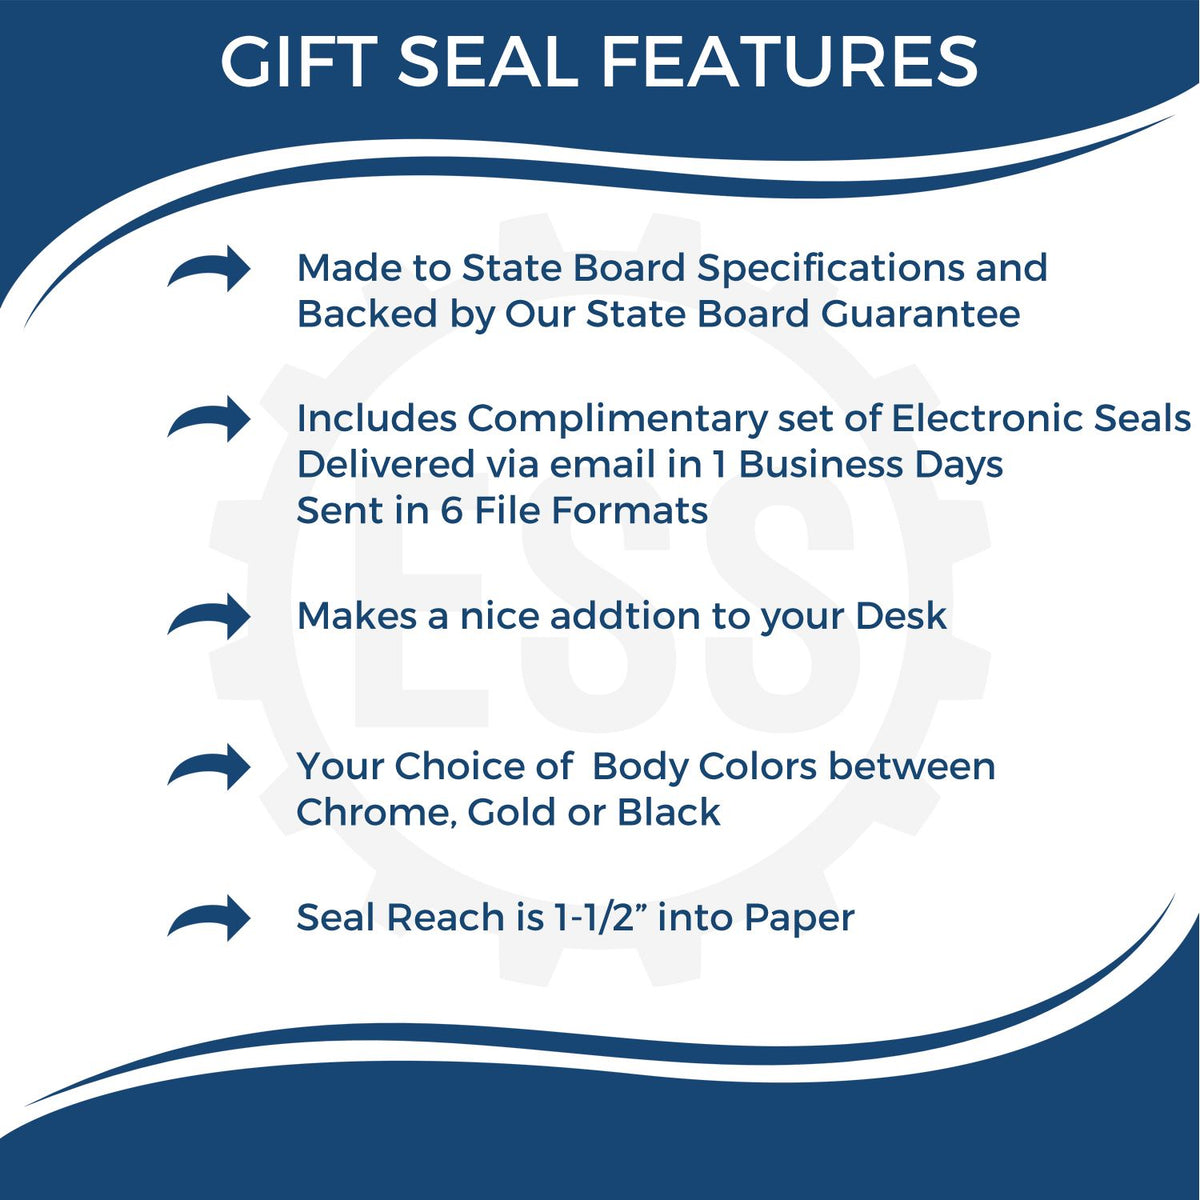 A picture of an infographic highlighting the selling points for the Gift Mississippi Geologist Seal